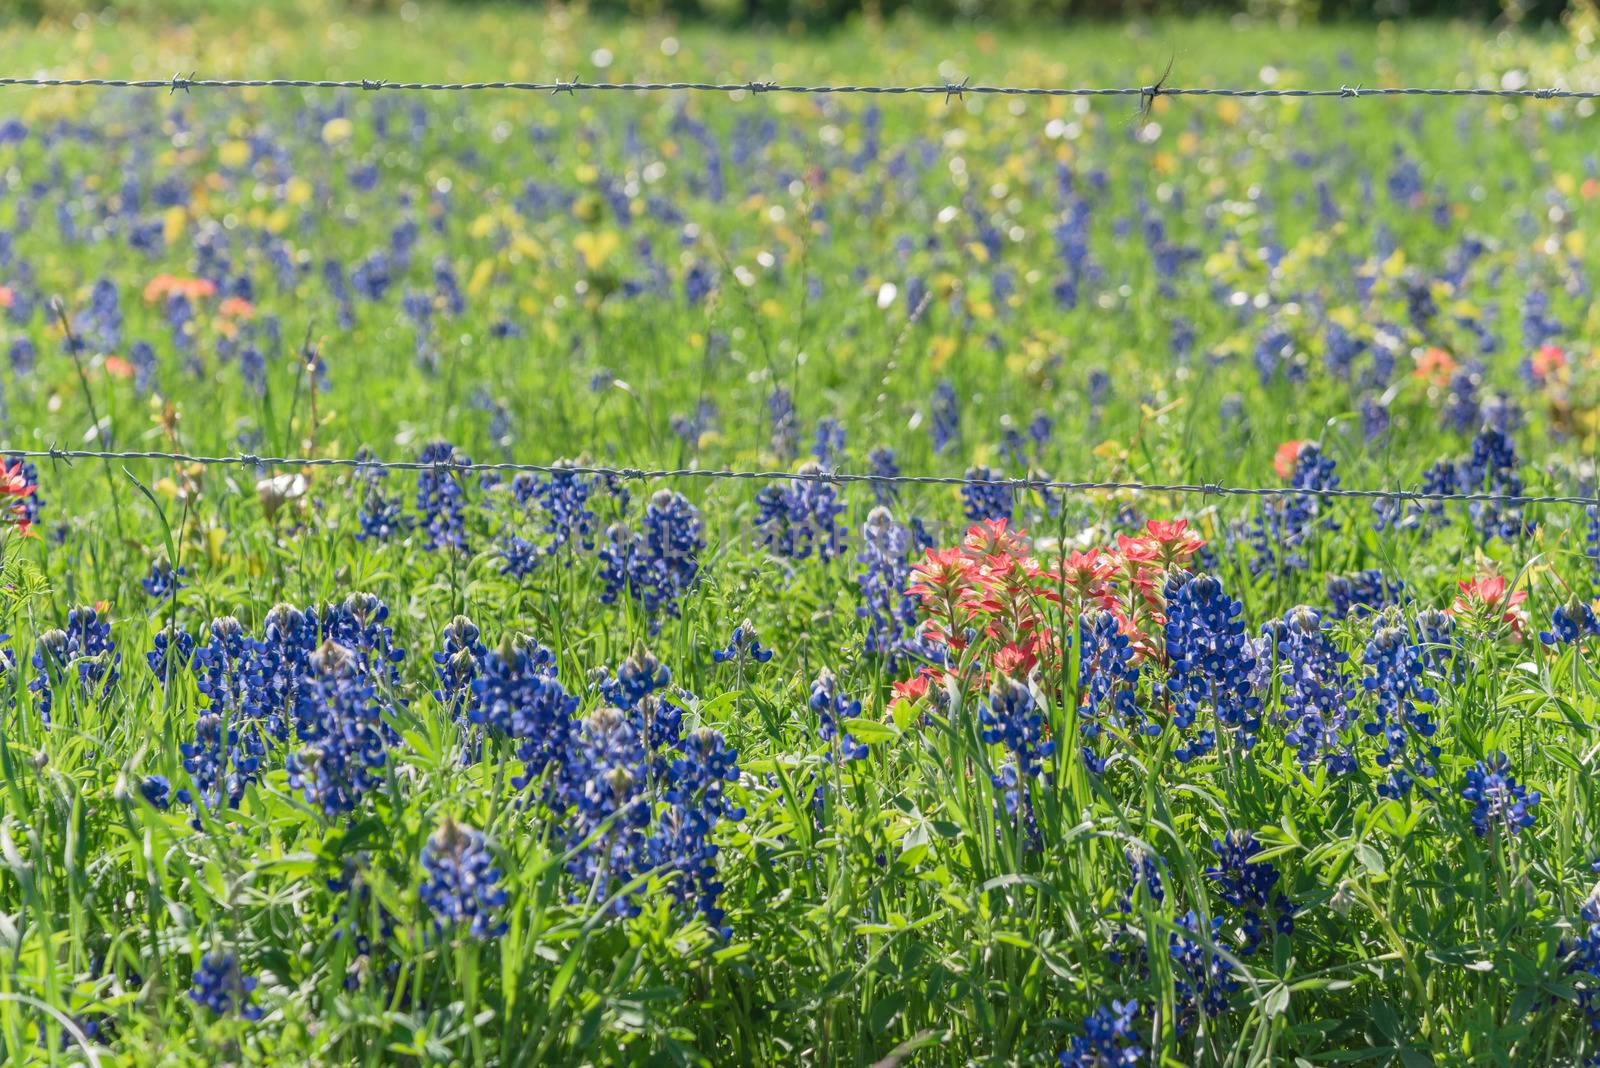 Close-up bush of Indian Paintbrush DescriptionCastilleja foliolosa and Bluebonnet blooming near barbed wire fence in Bristol, Texas, USA. Wildflower meadow blossom in springtime